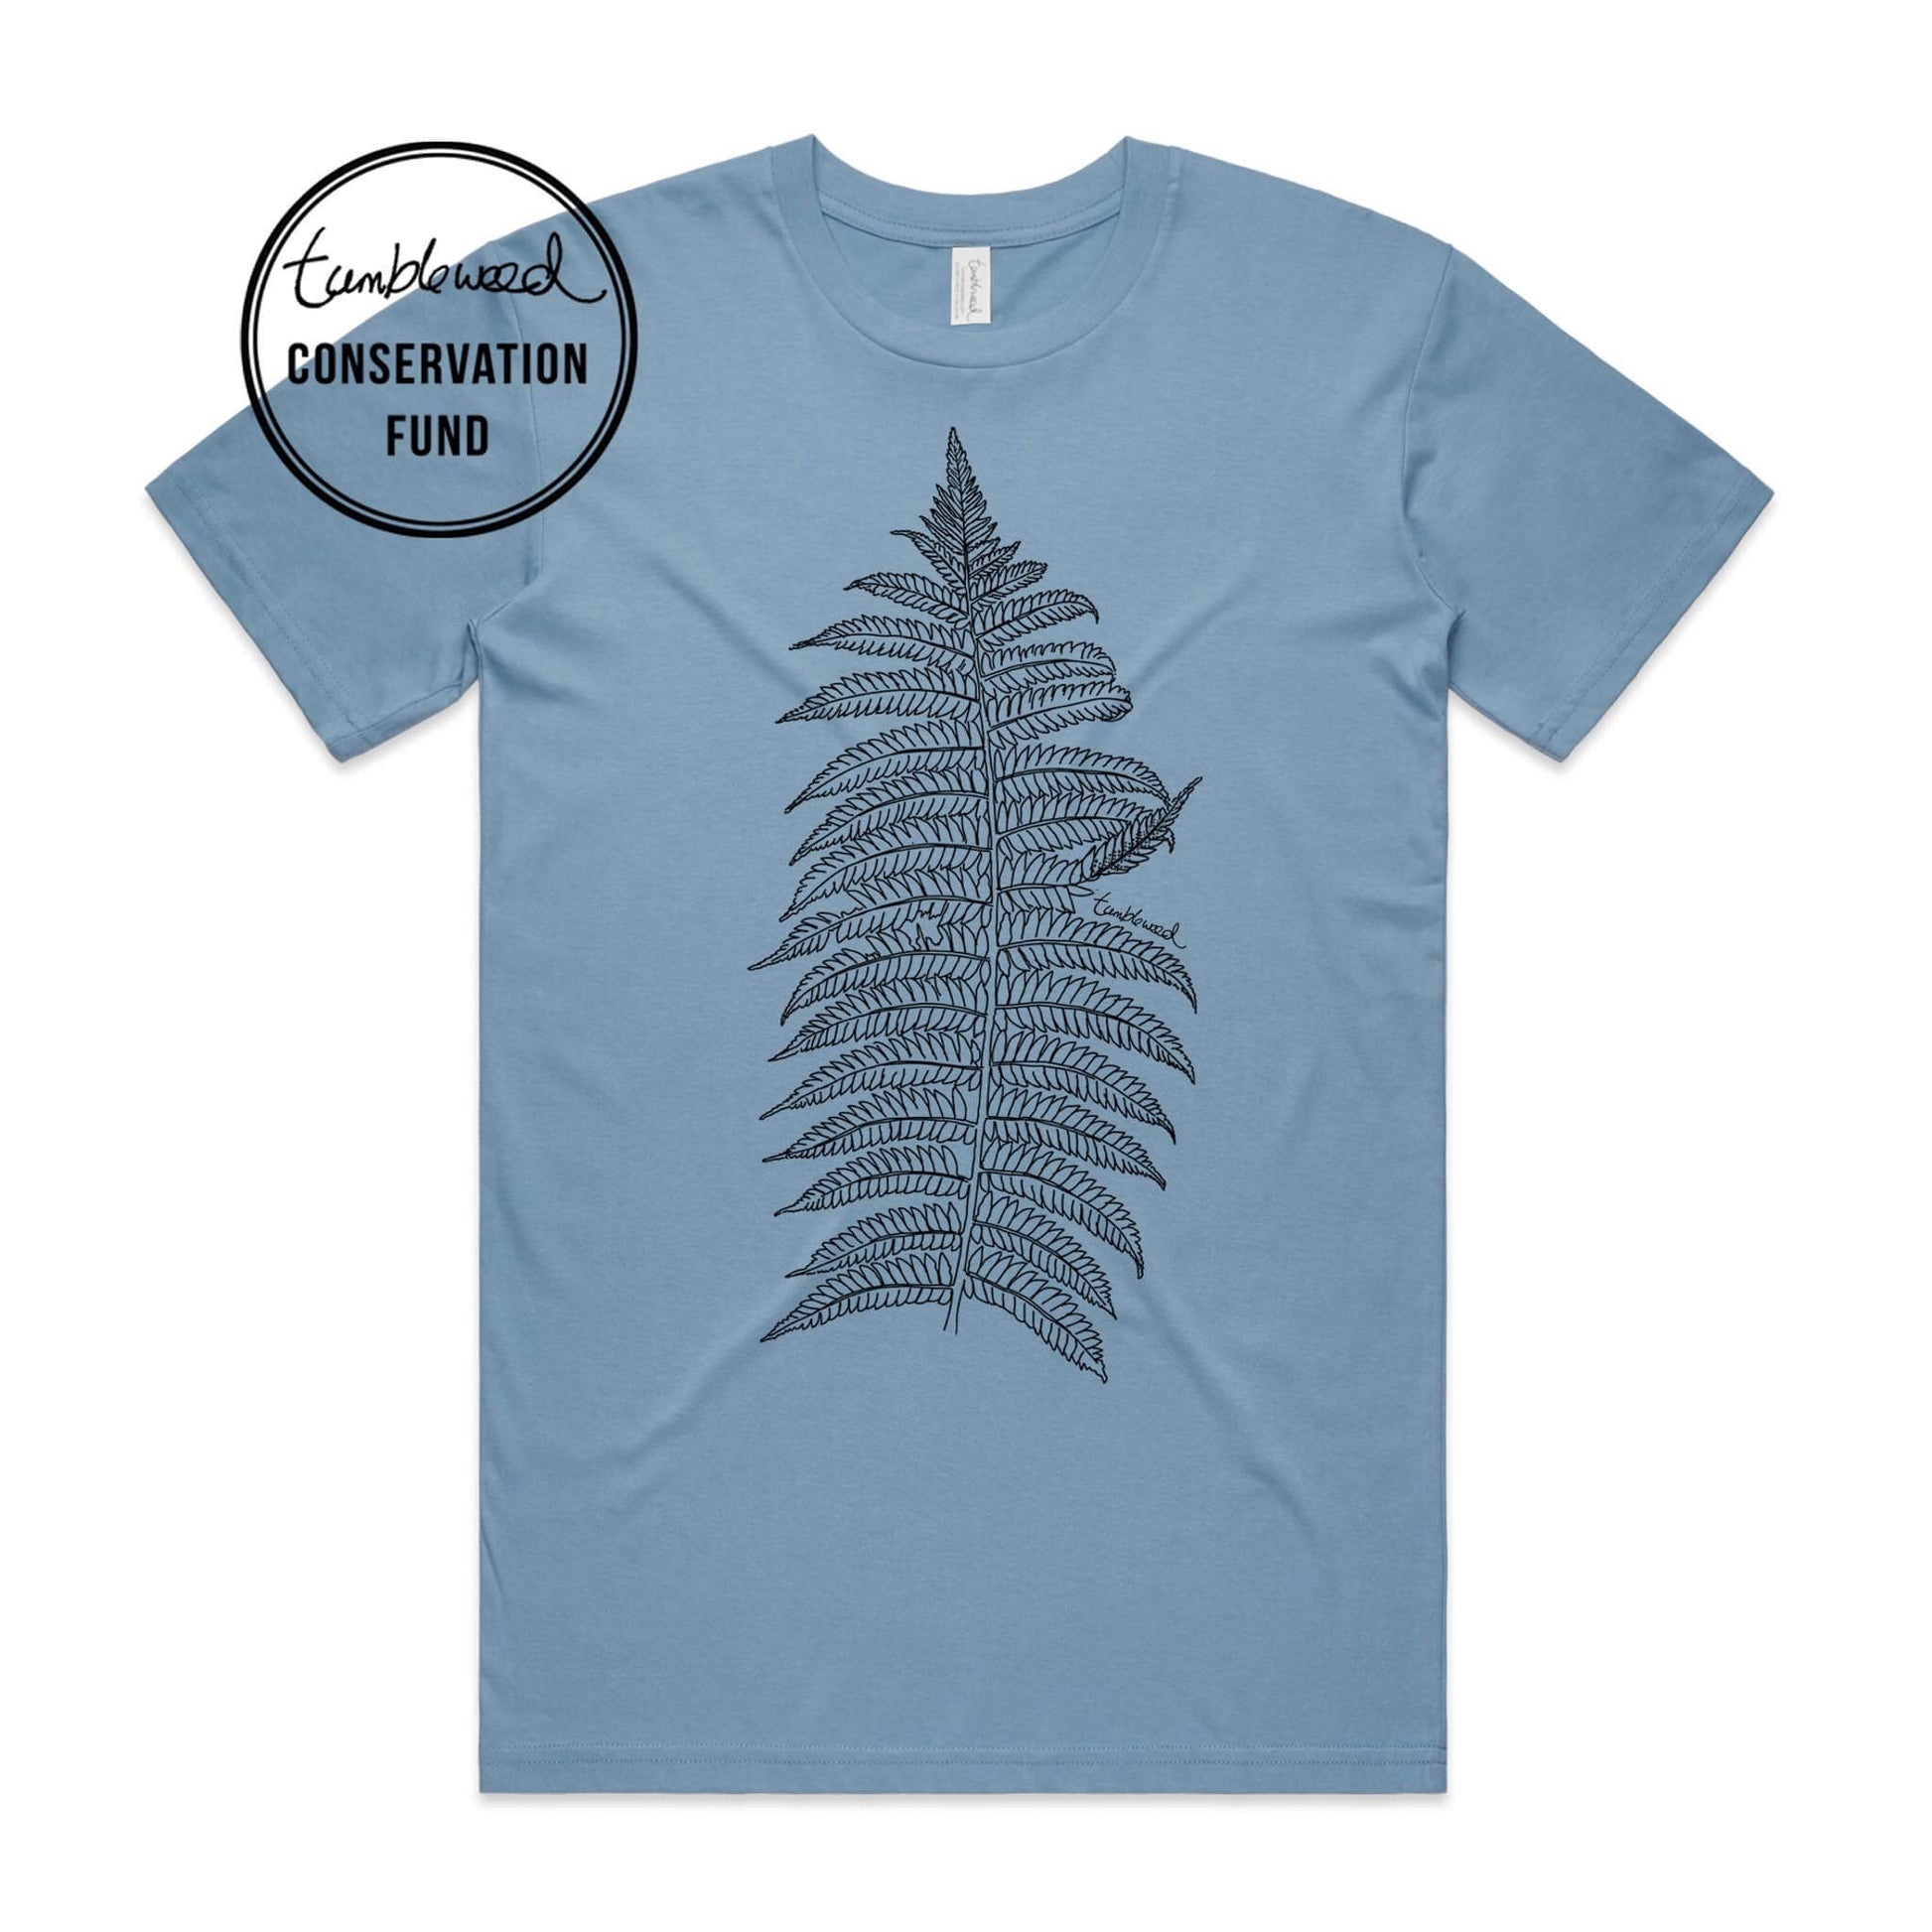 Sage, male t-shirt featuring a screen printed Silver fern/ponga design.